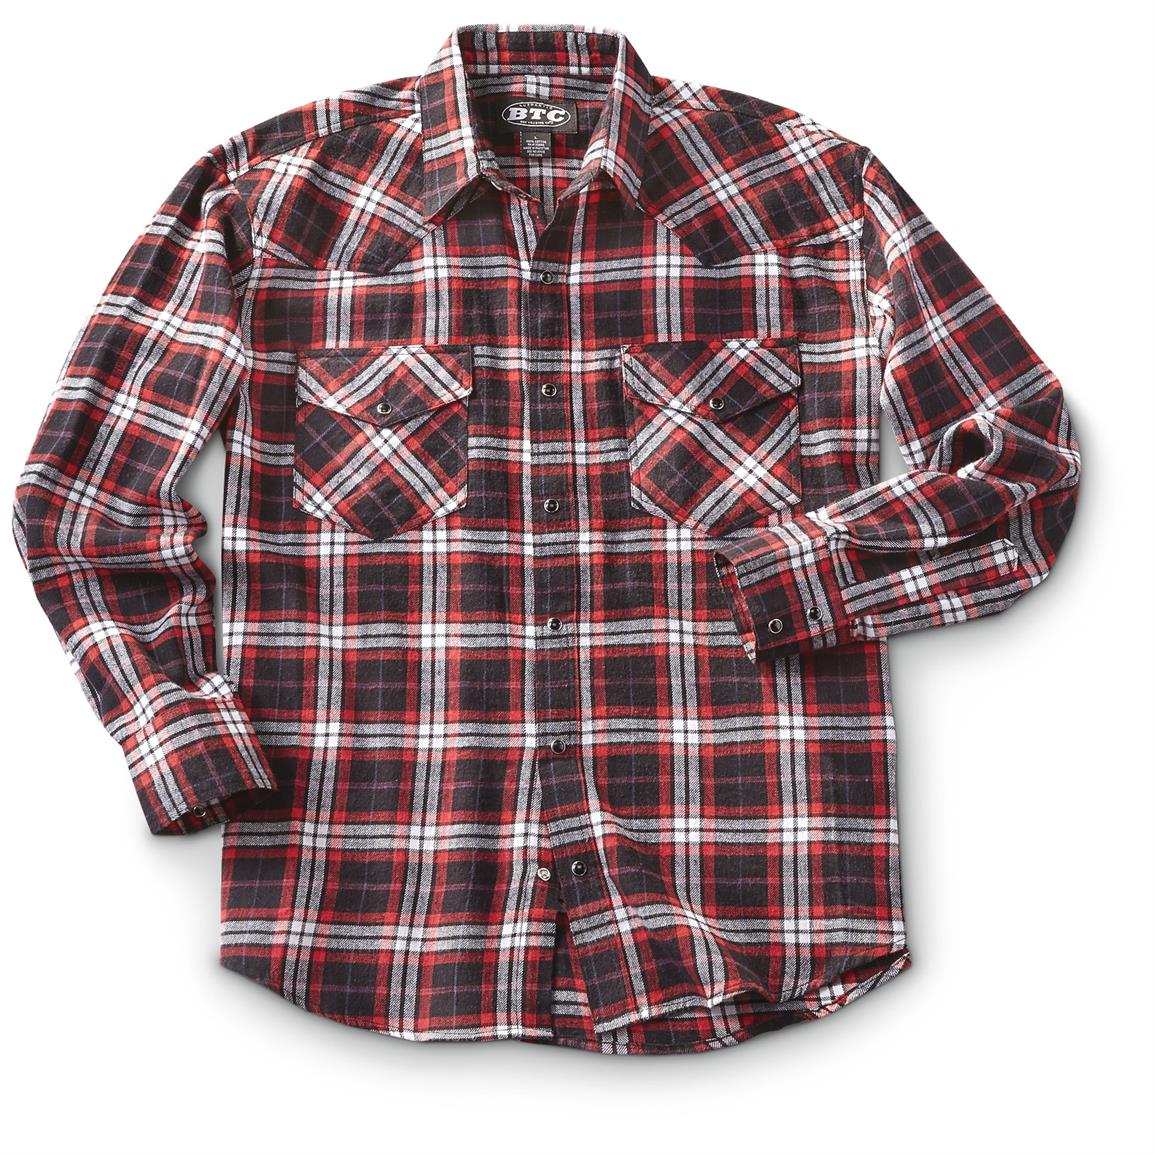 Men's Western Flannel Shirt - 639197, Shirts at Sportsman's Guide